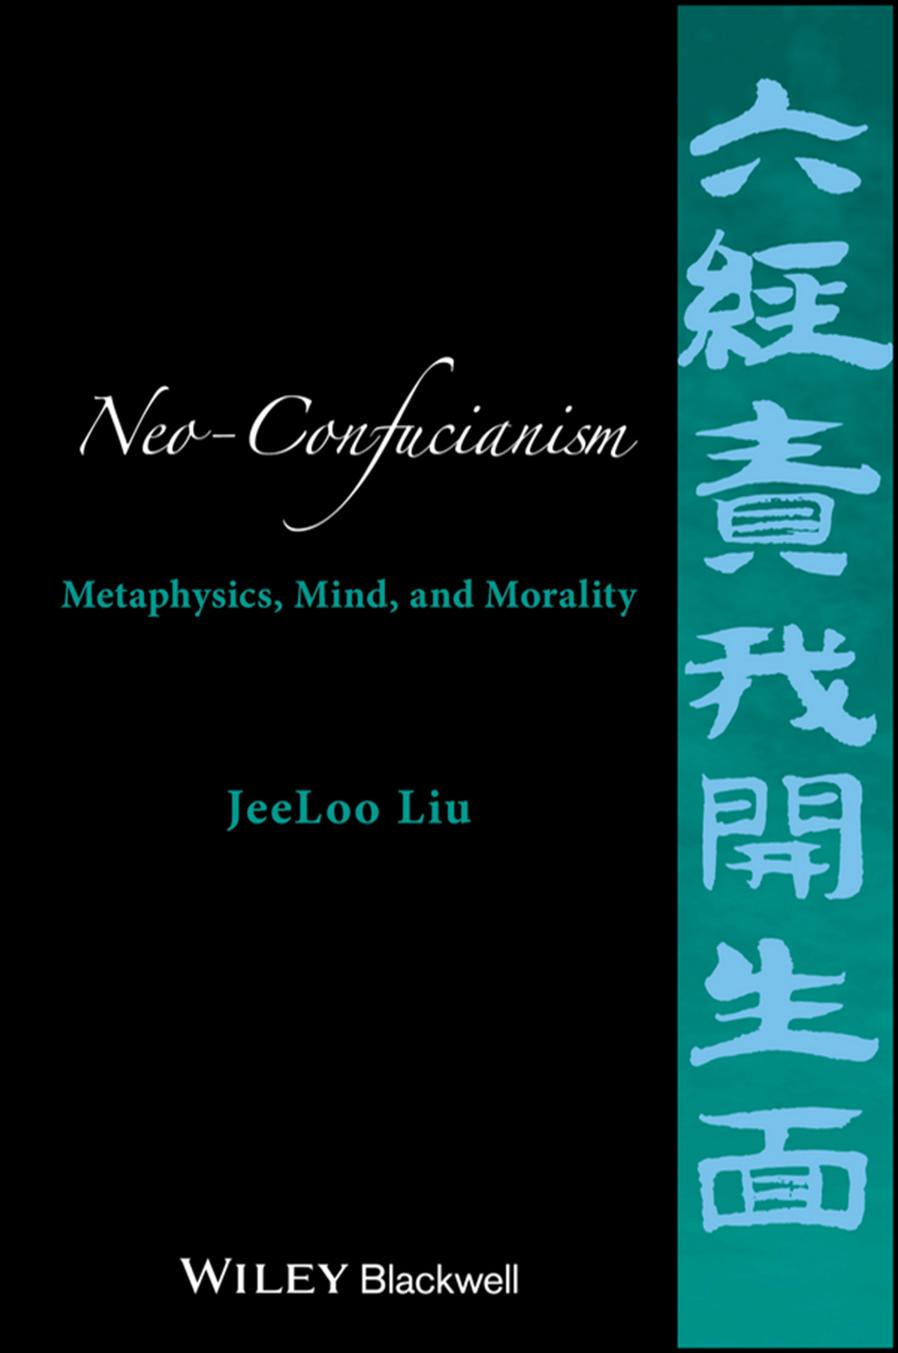 Neo-Confucianism: Metaphysics, Mind, and Morality by JeeLoo Liu